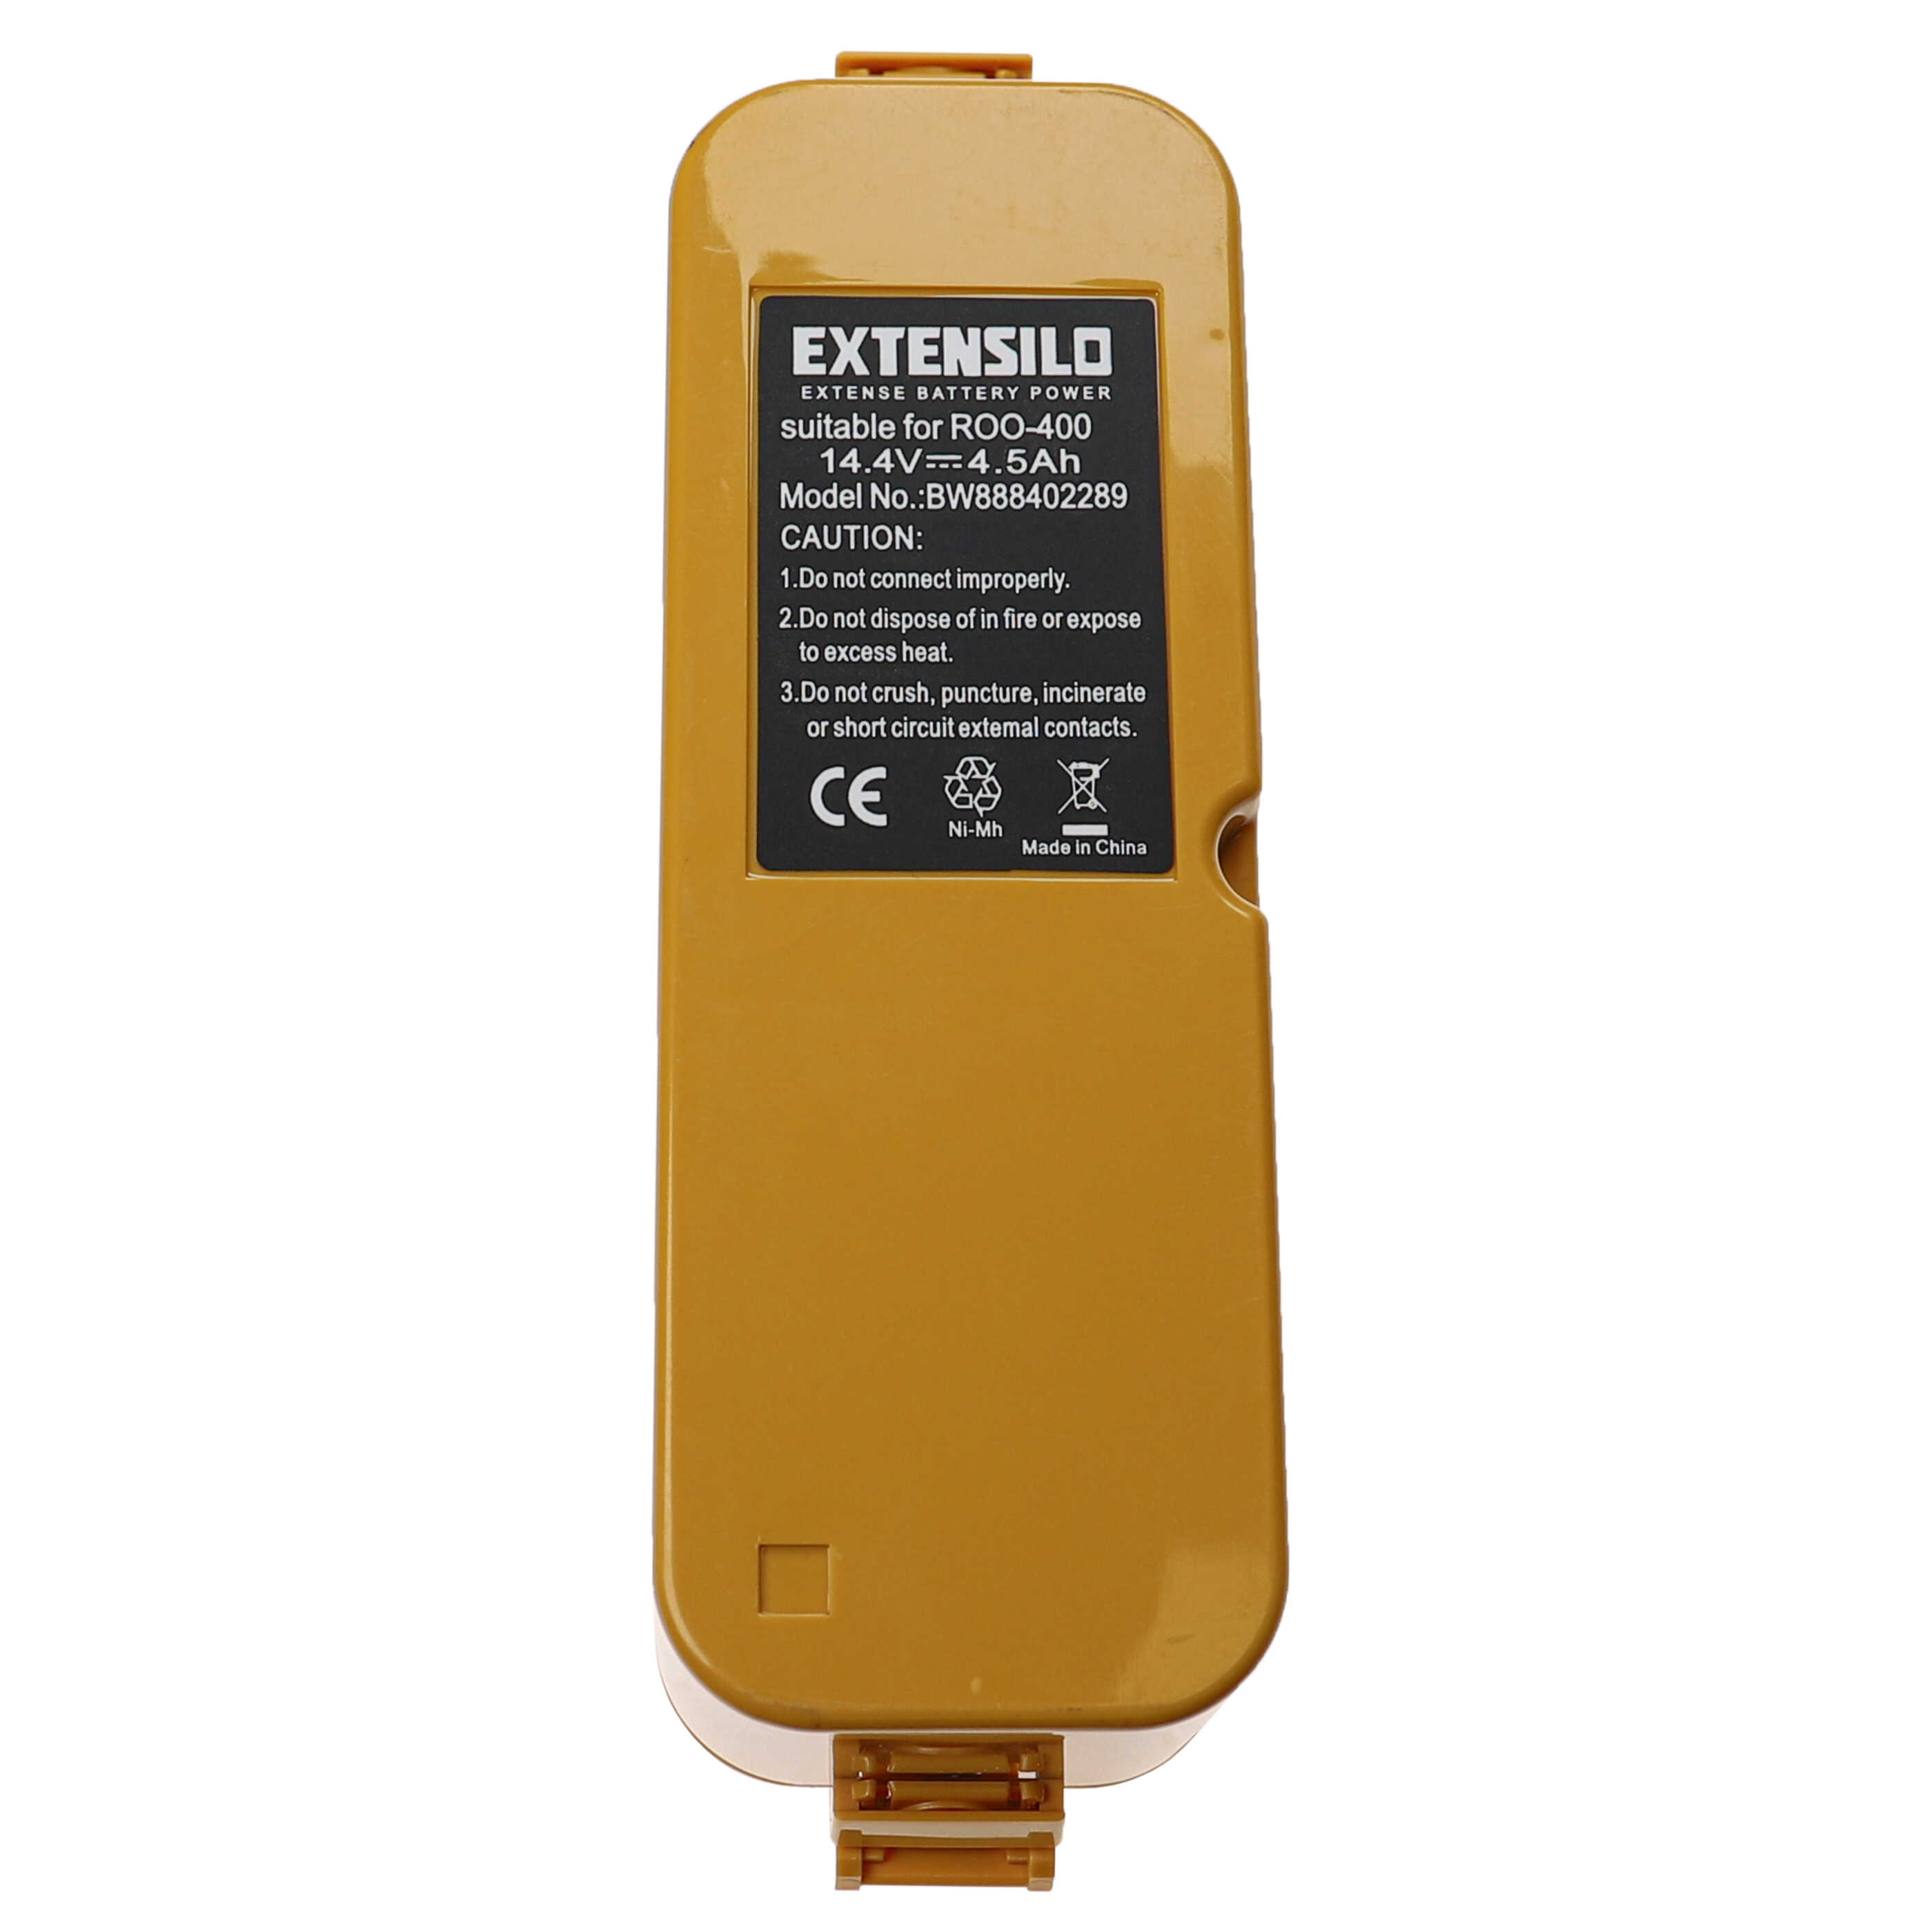 Battery Replacement for APS 4905, NC-3493-919, 11700, 17373 for - 4500mAh, 14.4V, NiMH